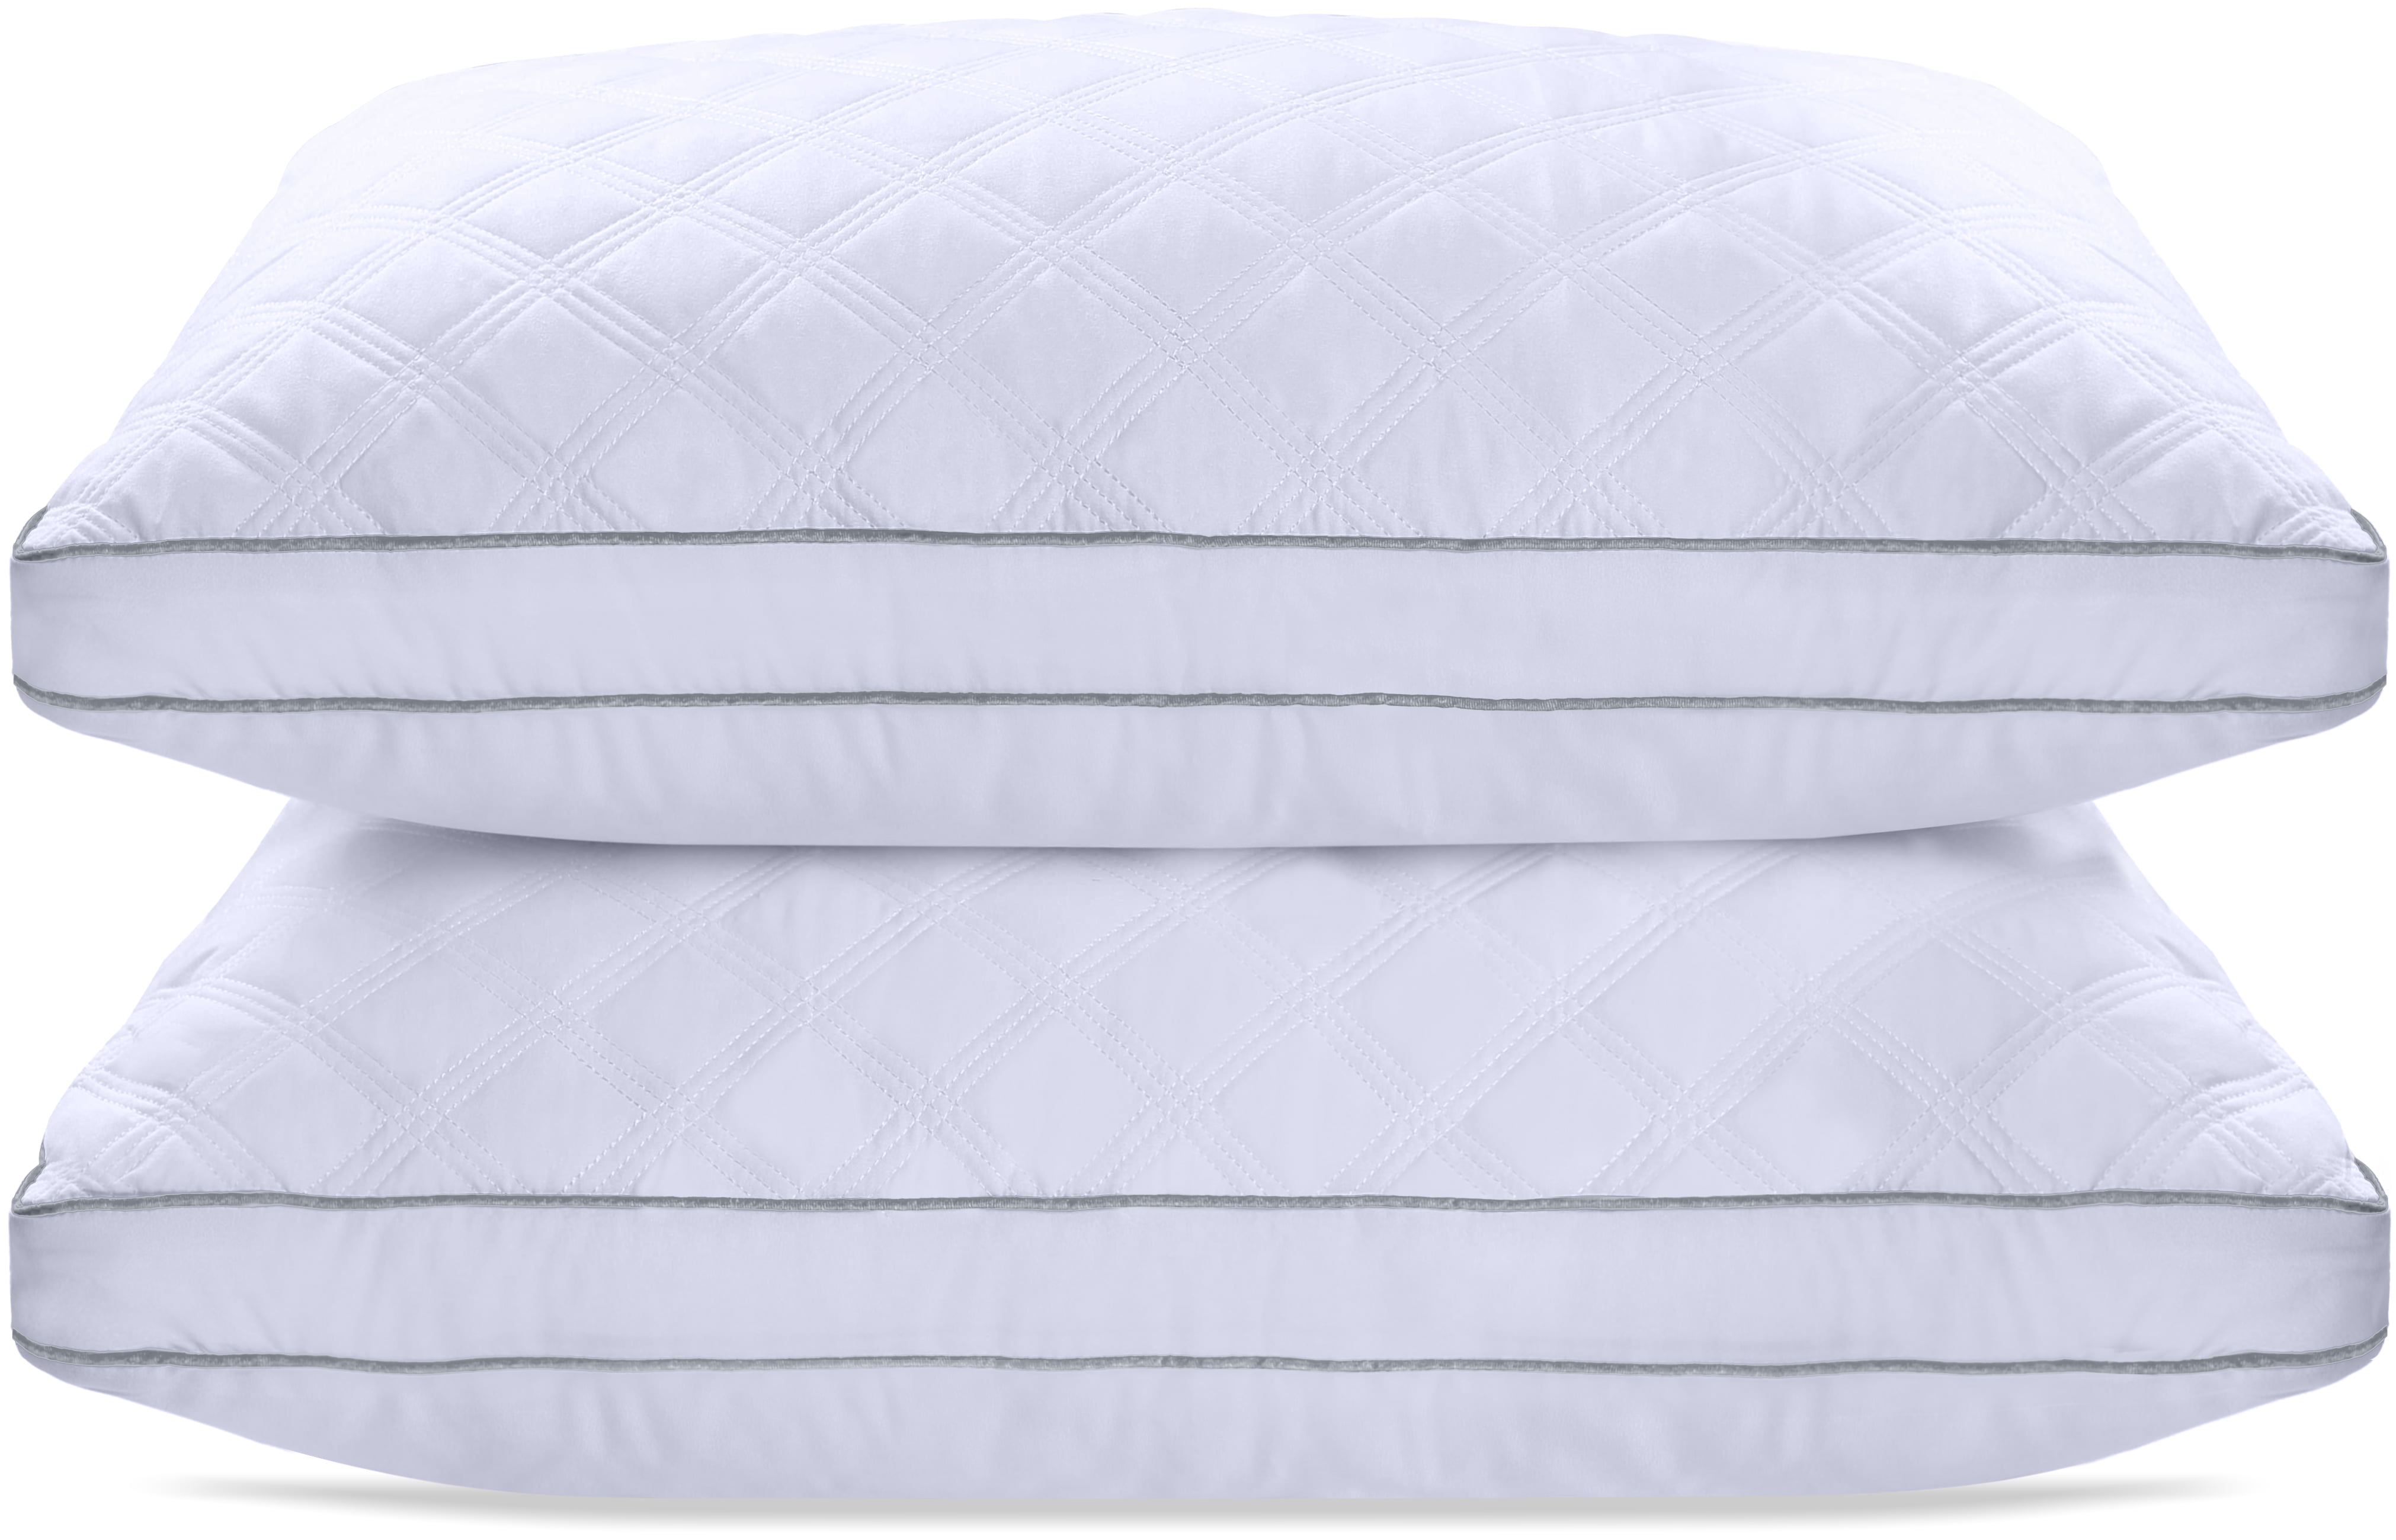 Queen 2-Pack GW2018031622-1 Basics Down-Alternative Gusseted Pillows with Cotton Shell